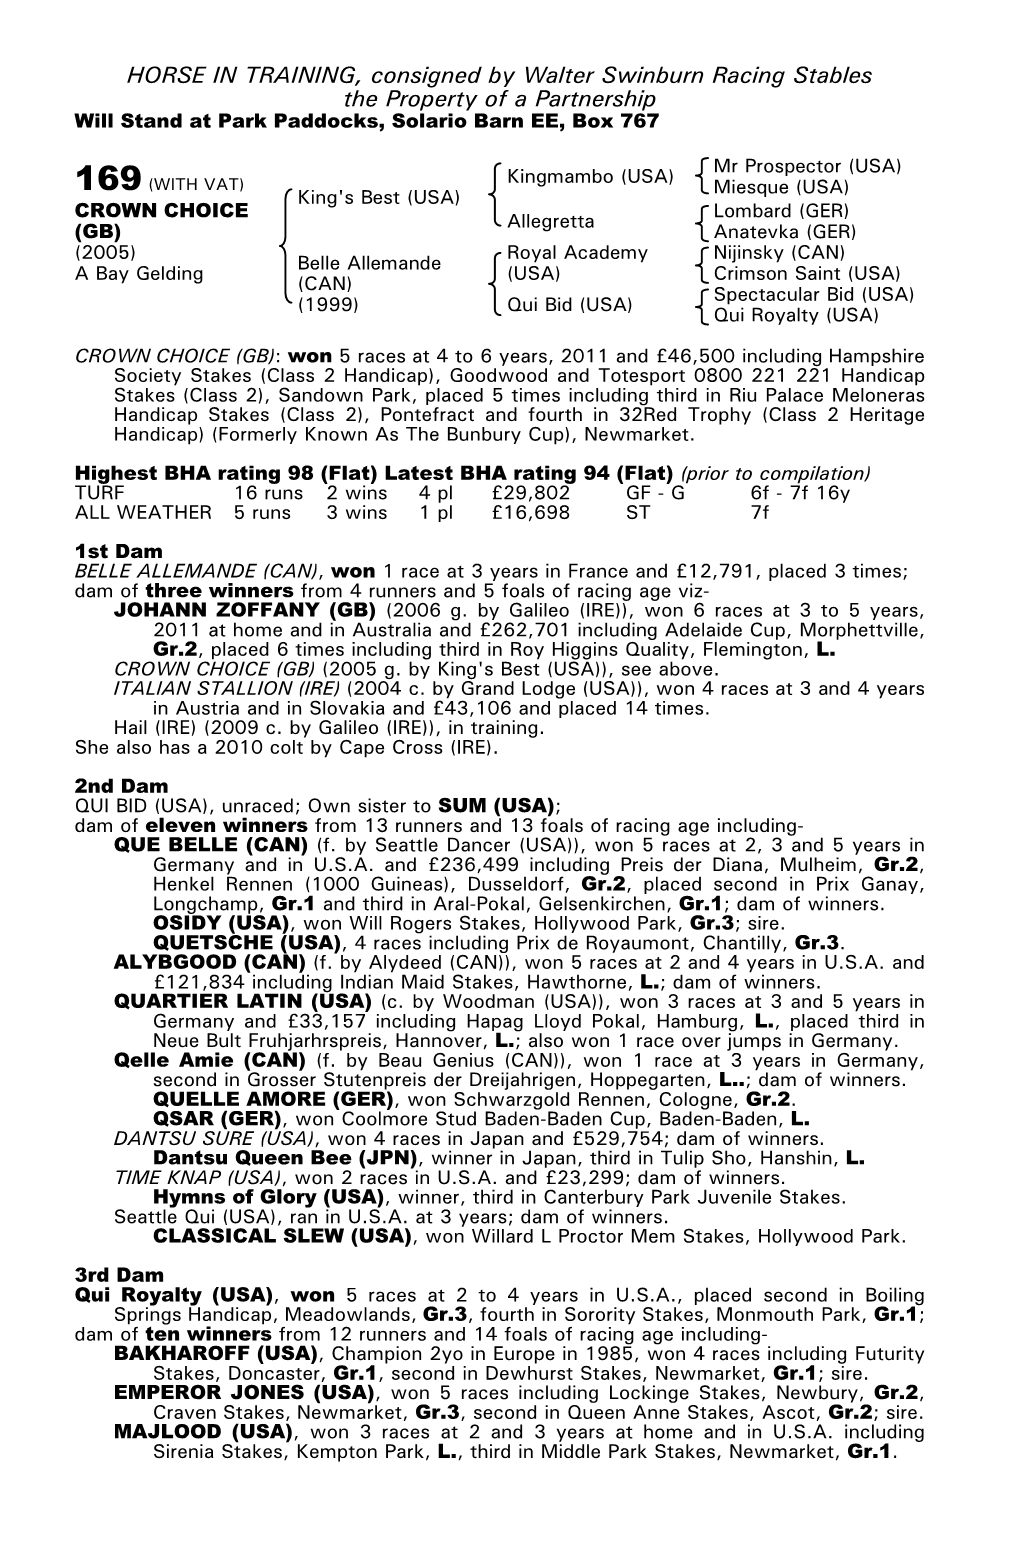 HORSE in TRAINING, Consigned by Walter Swinburn Racing Stables the Property of a Partnership Will Stand at Park Paddocks, Solario Barn EE, Box 767